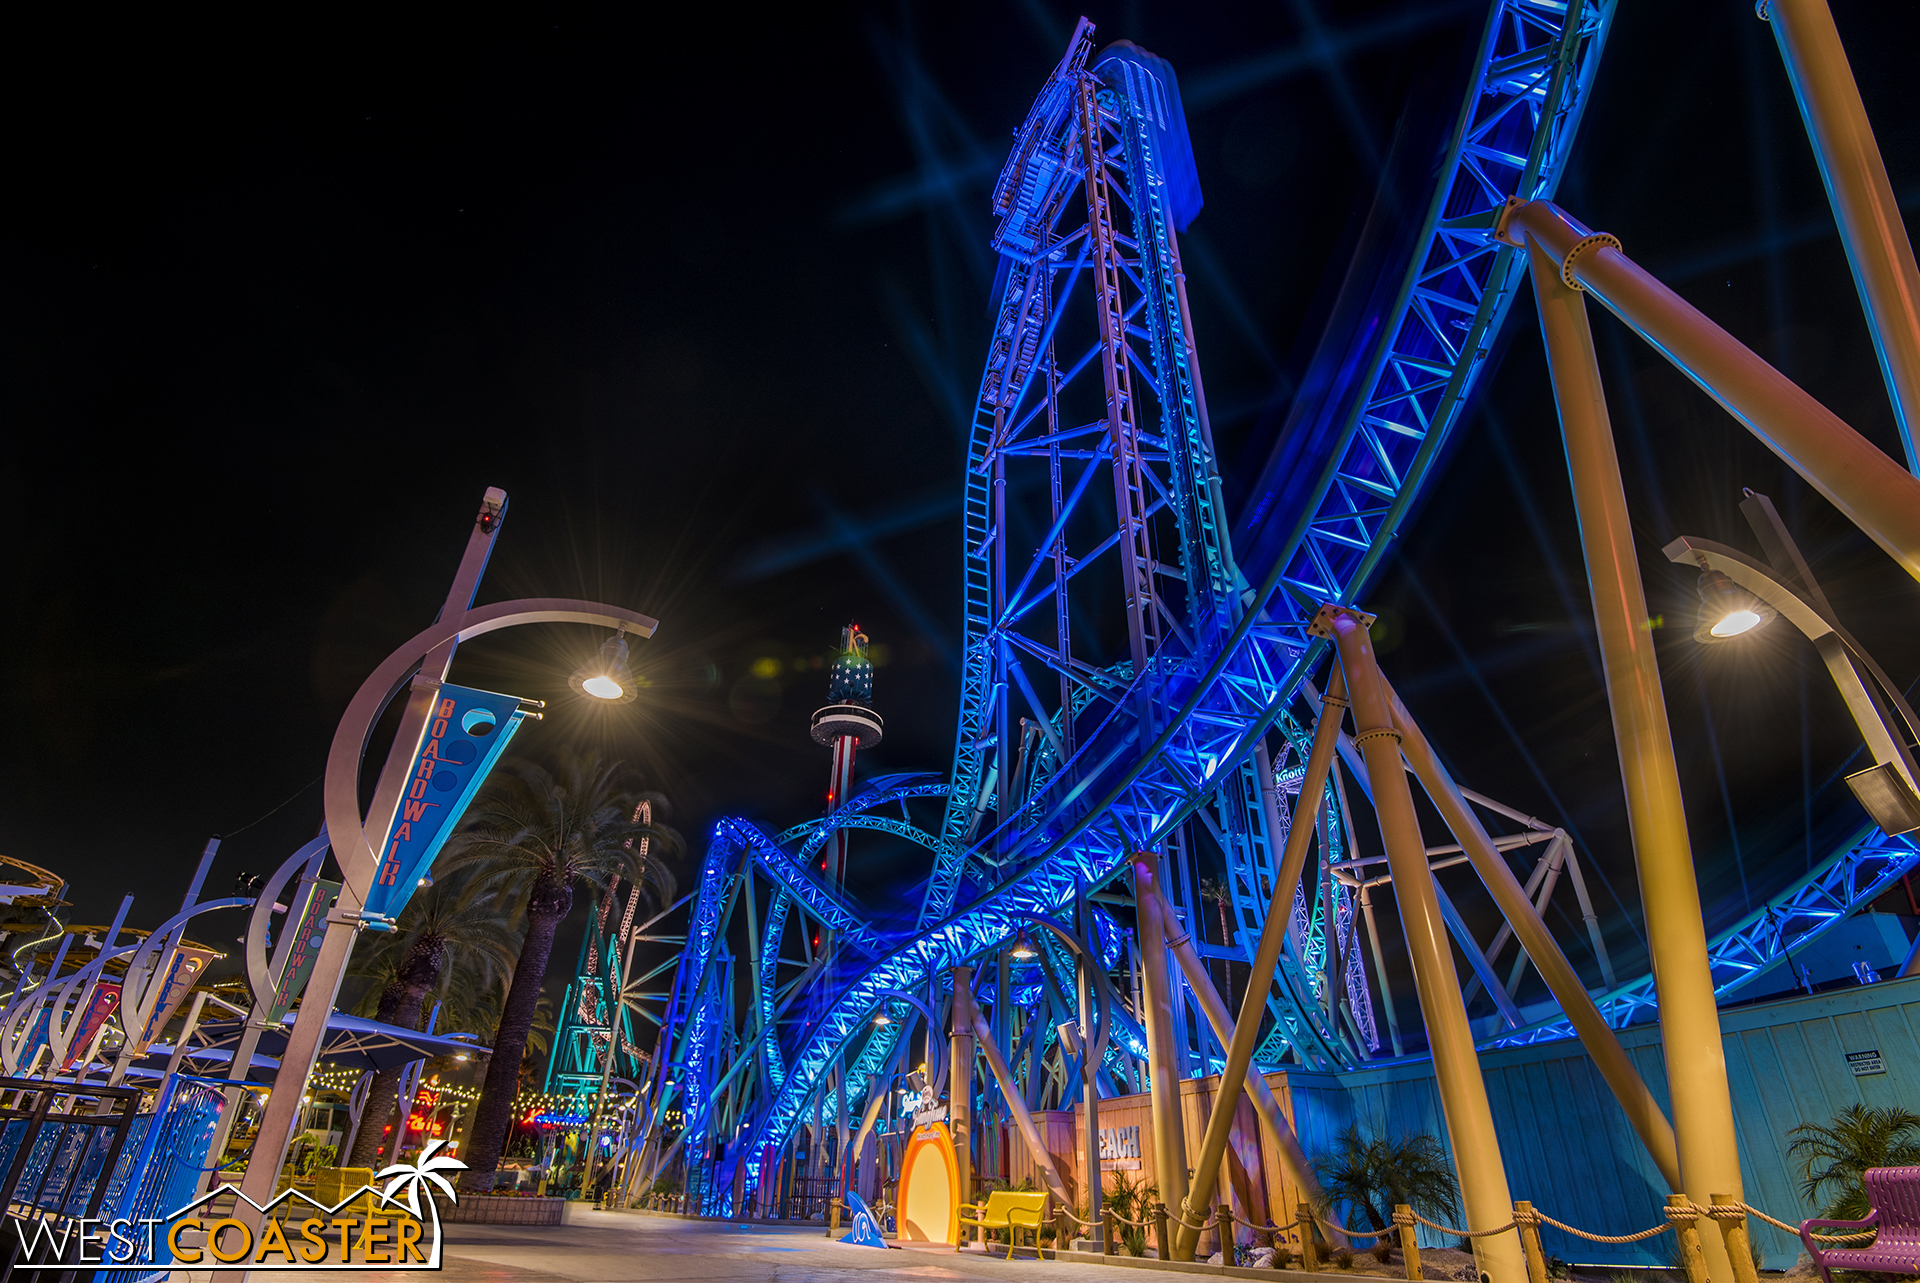  Compositing several exposures together to capture the coaster train blurring through the course. 